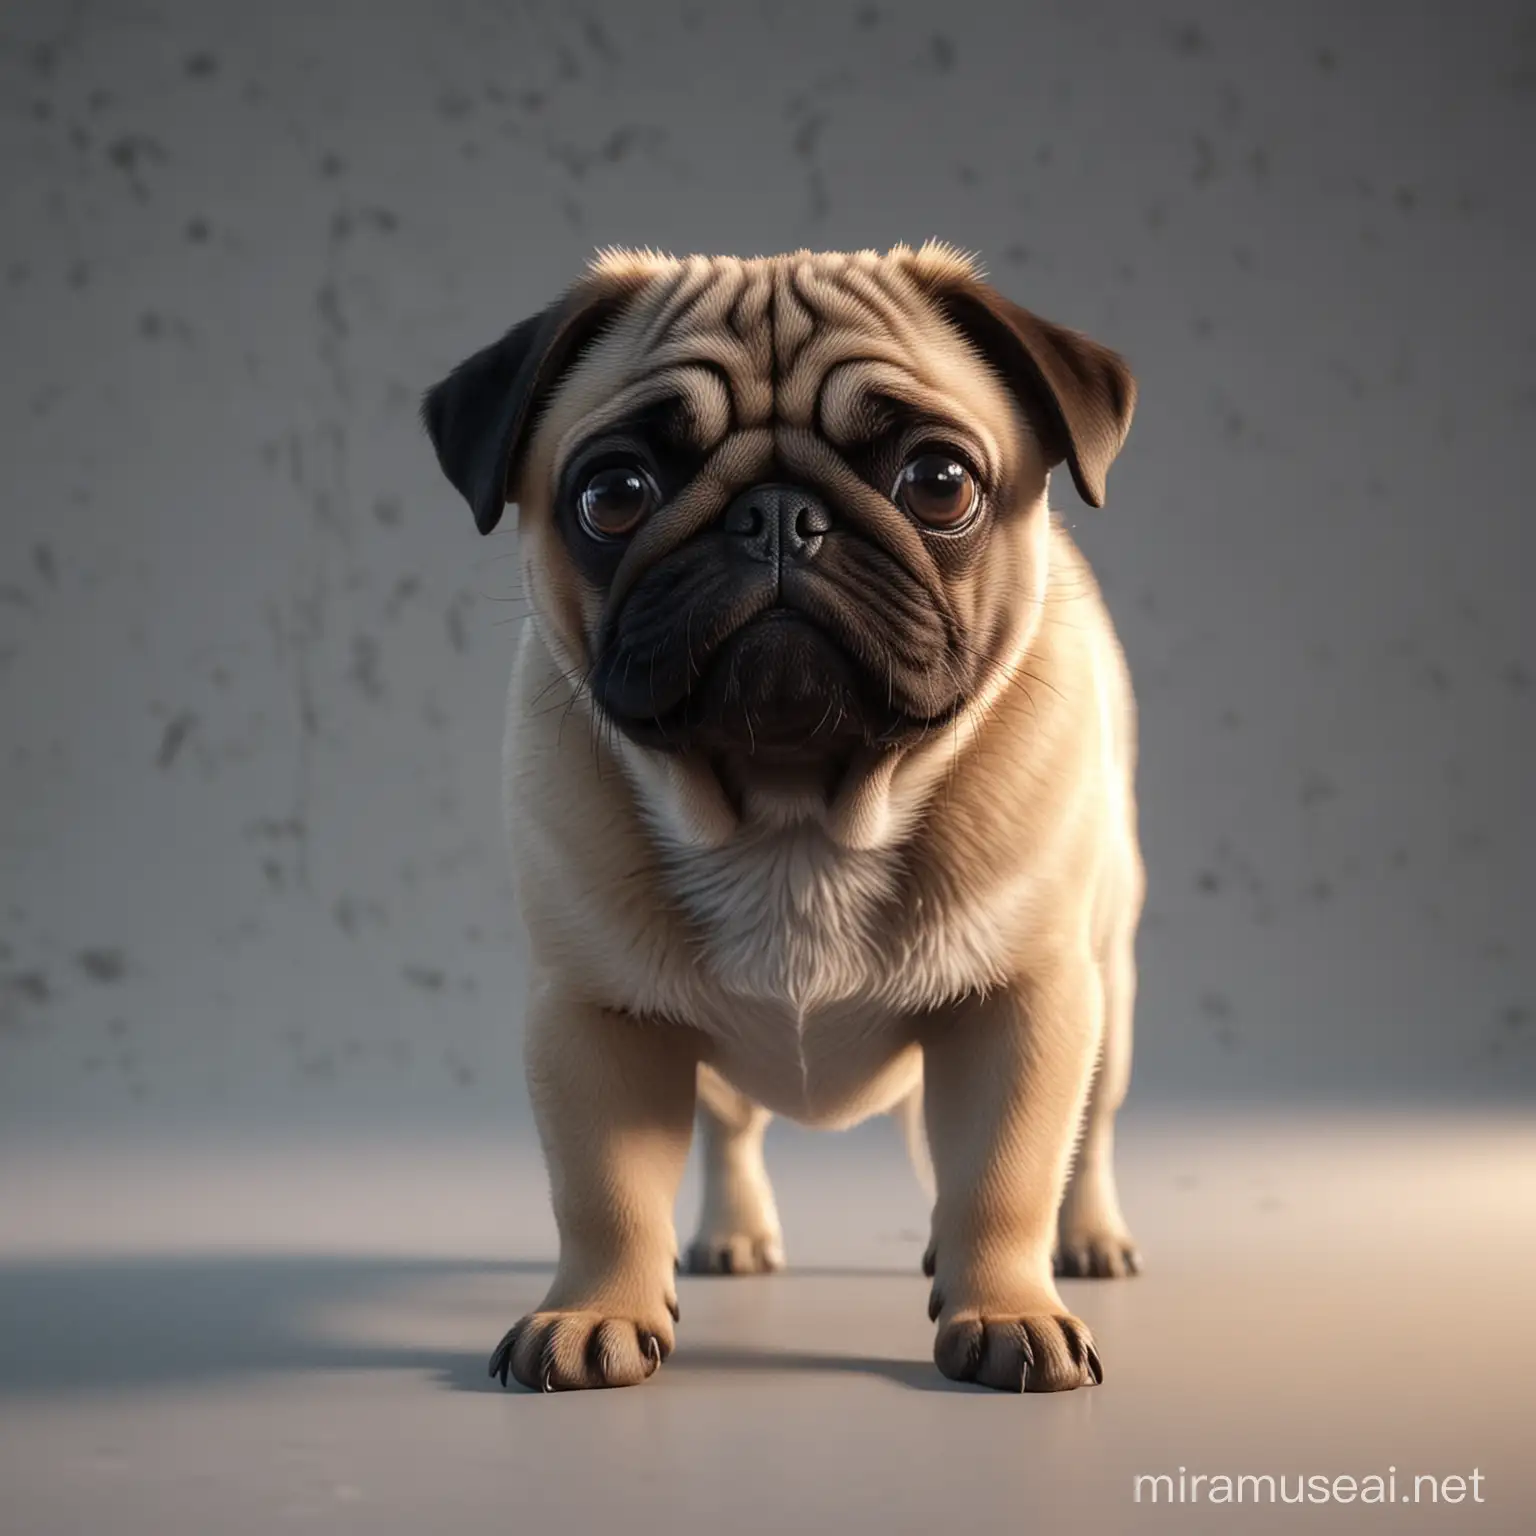 Pug. light background, color grading, unrealistic, super cute faces, super detailed background, whole picture with background, no background, epth of Field, Unreal
Engine, VR, Good, Massive, Halfrear Lighting, Backlight, Natural Lighting, Incandescent, Optical Fiber, Cinematic Lighting, Studio Lighting, Soft Lighting, Volumetric, Contre-Jour, Beautiful Lighting, Accent Lighting, Global Illumination, Screen Space Global Illumination, Ray Tracing Global Illumination, Optics, Scattering, Glowing, Shadows, Rough, Shimmering, Ray Tracing Reflections, Lumen ReflectionsDepth of Field, Unreal Engine, professional mid journey prompt by sam mcfly, in the style of digital art techniques, cute and dreamy, whimsical design, cryengine, mischievous feline motif, album covers, d&d --ar 99:124 --v 5 --s 250